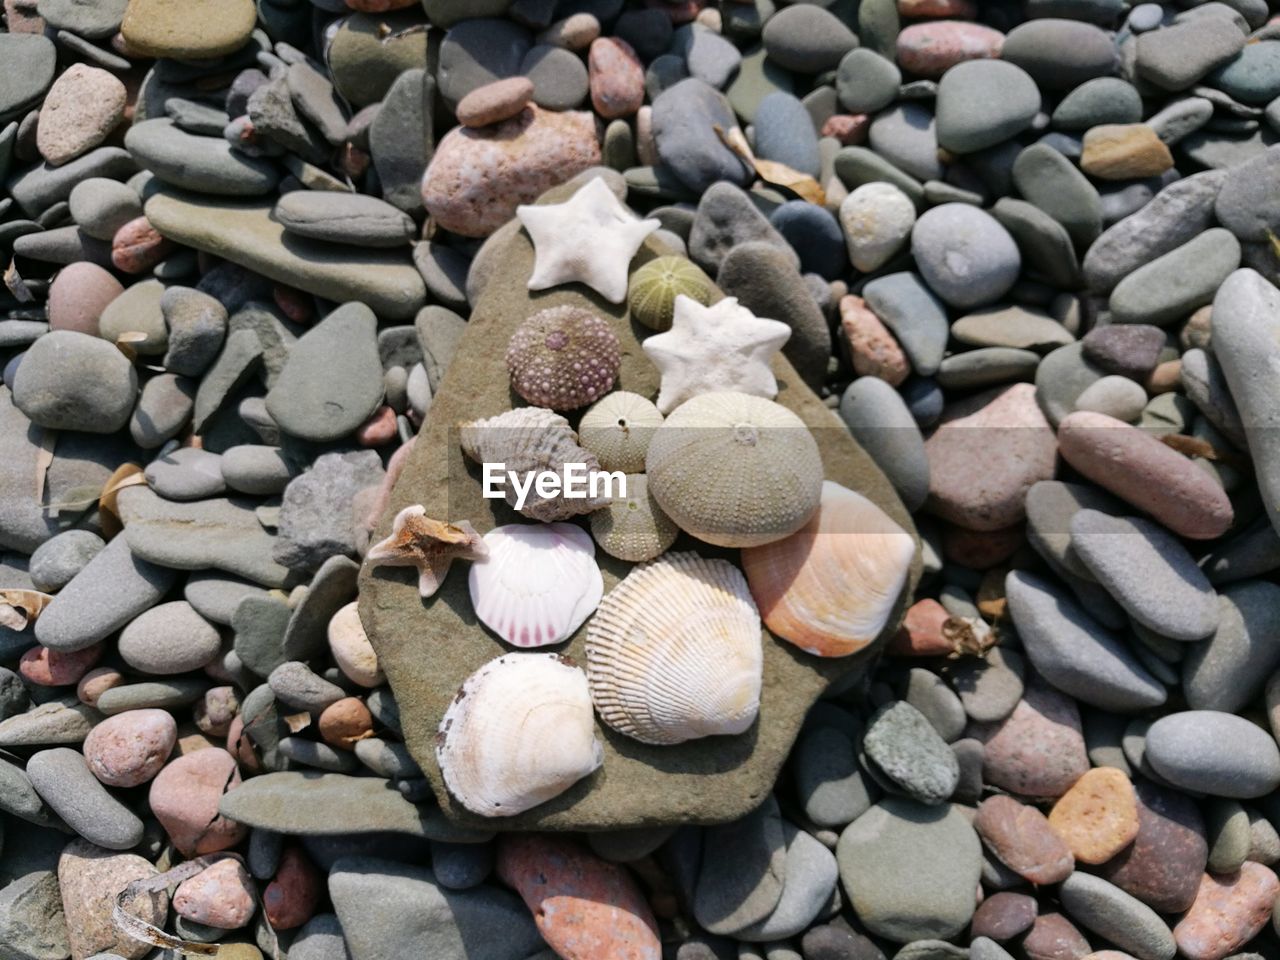 HIGH ANGLE VIEW OF SHELLS ON STONES AT BEACH